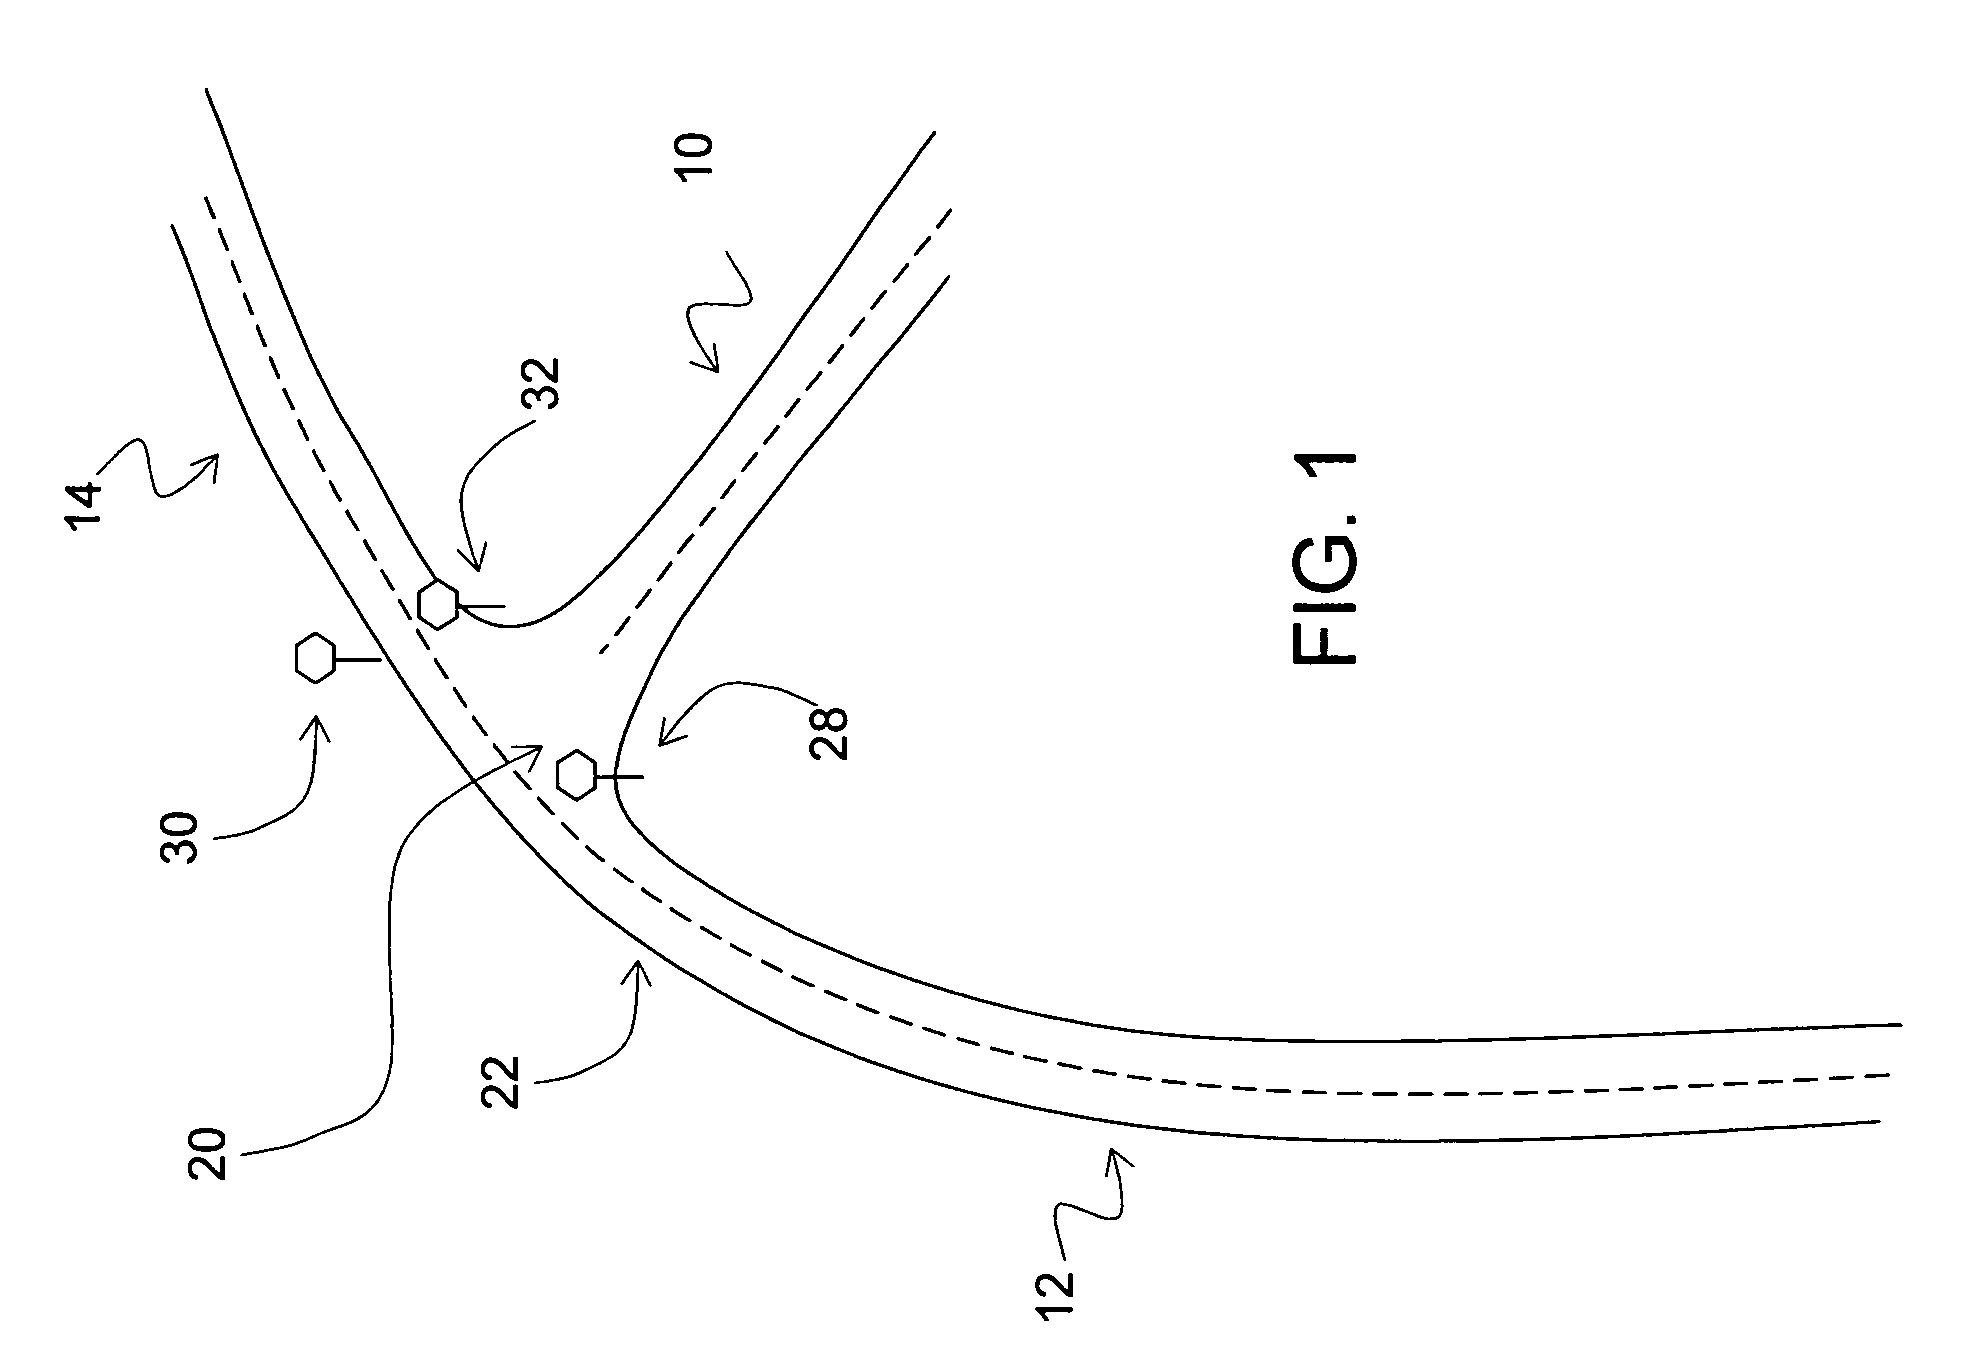 Data mining for traffic signals or signs along road curves and enabling precautionary actions in a vehicle